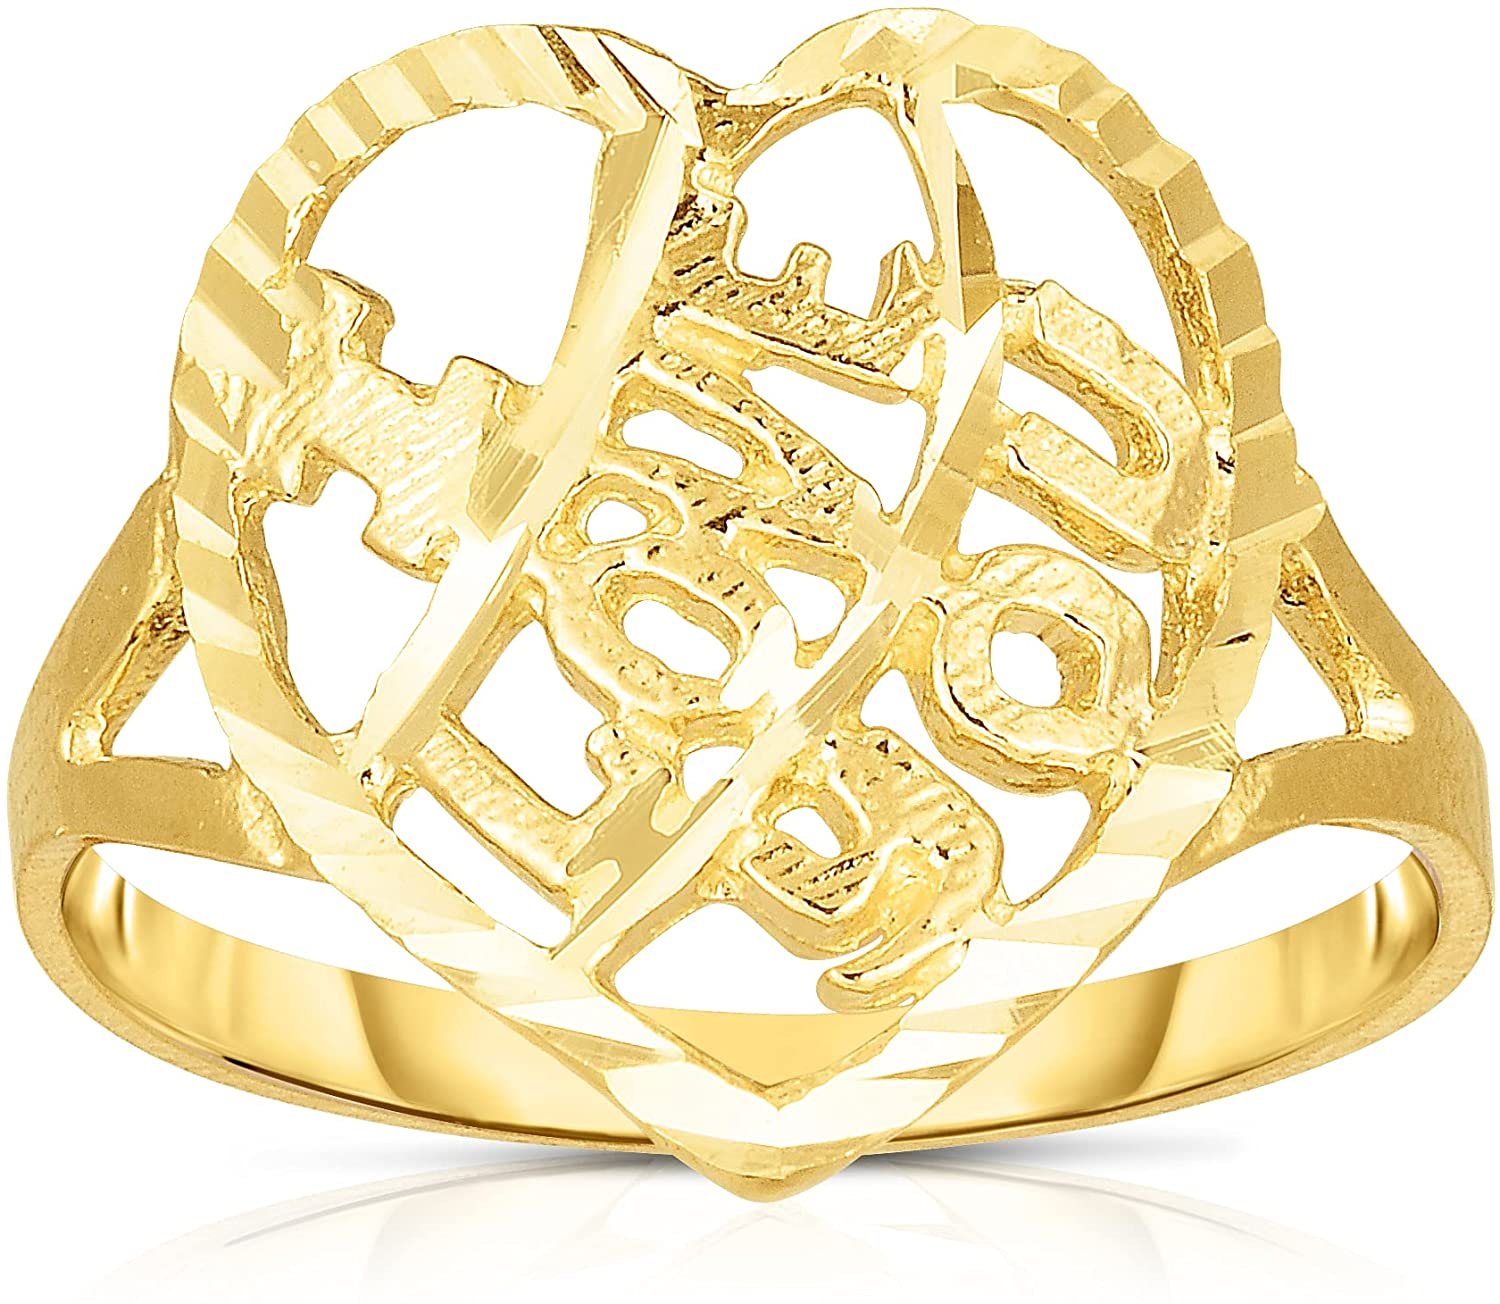 10k Yellow Gold “I Love You” Heart Ring, Sizes 5-12